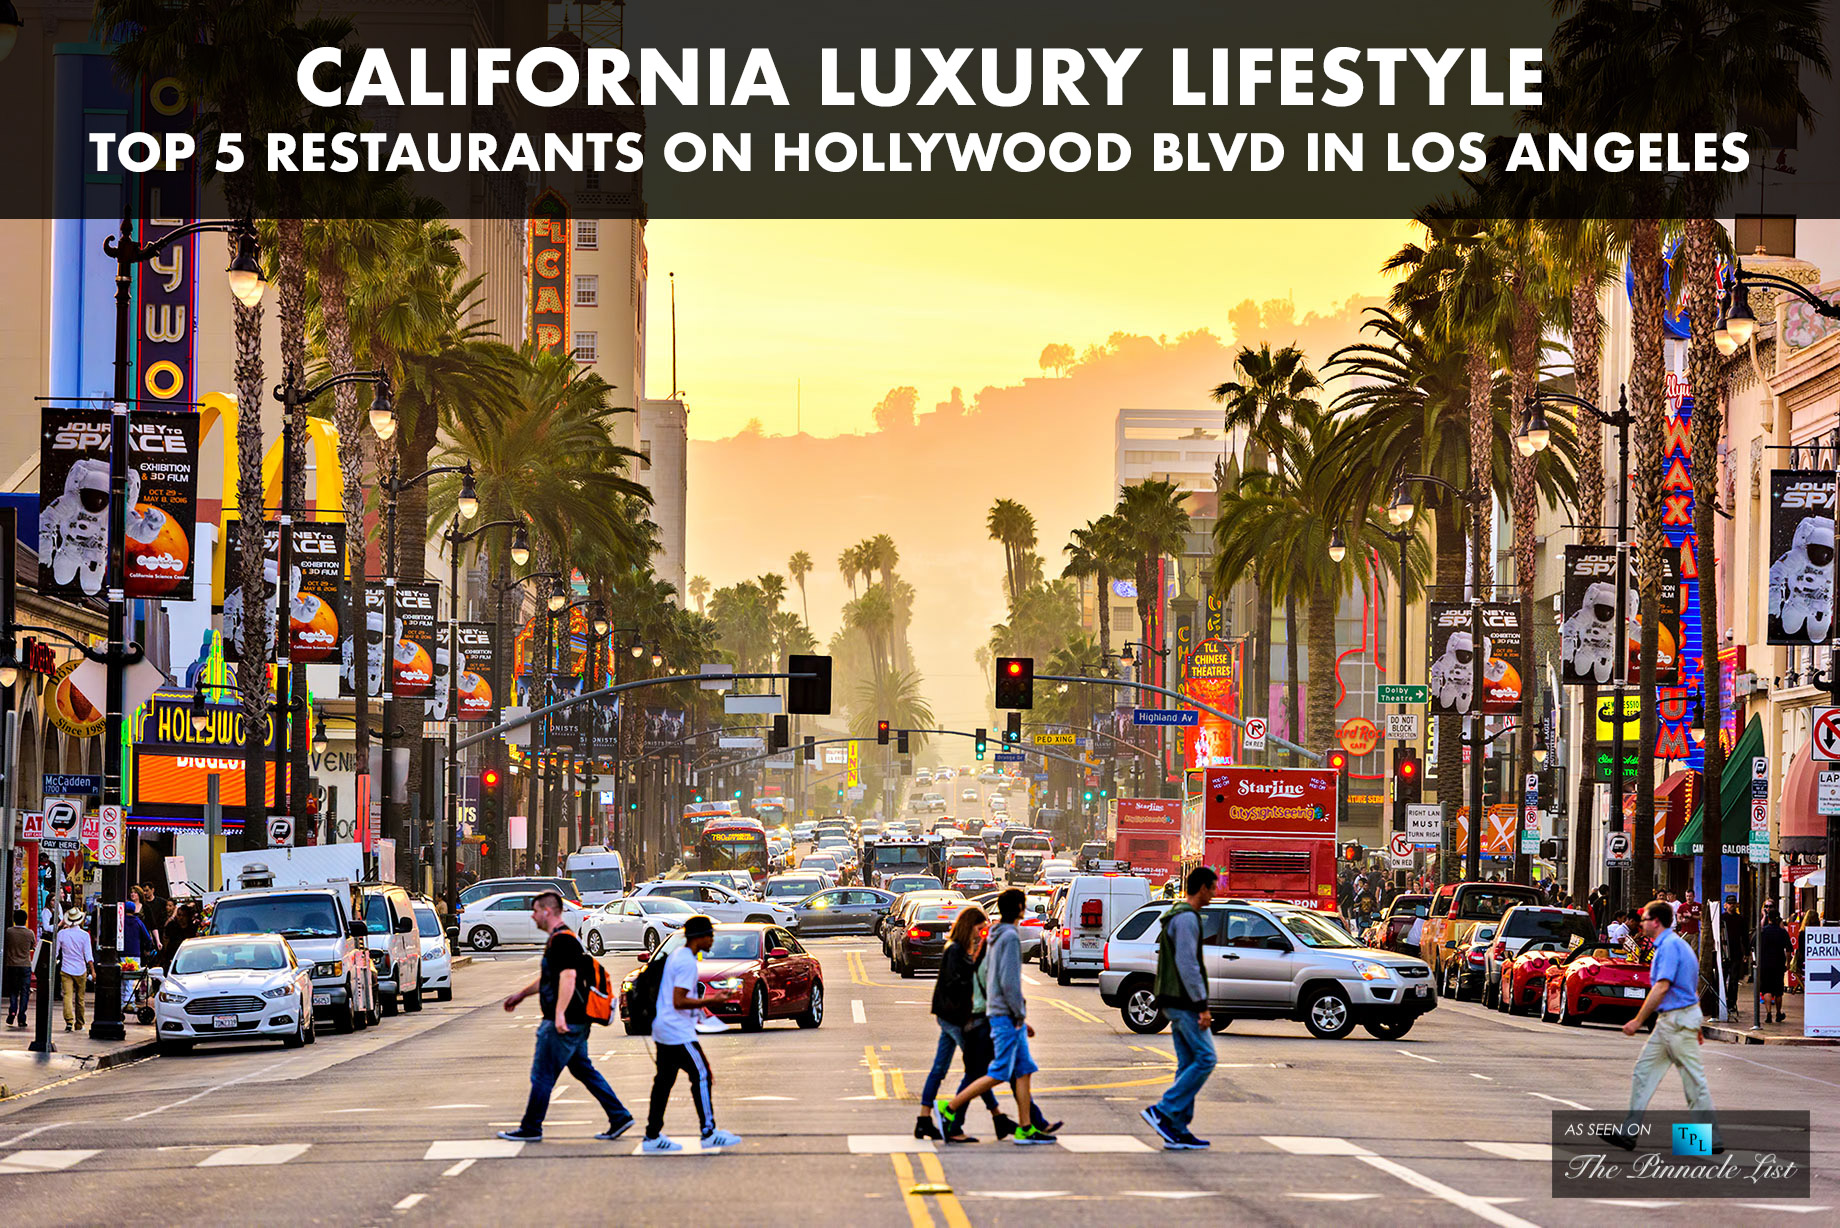 California Luxury Lifestyle - Top 5 Restaurants on Hollywood Blvd in Los Angeles